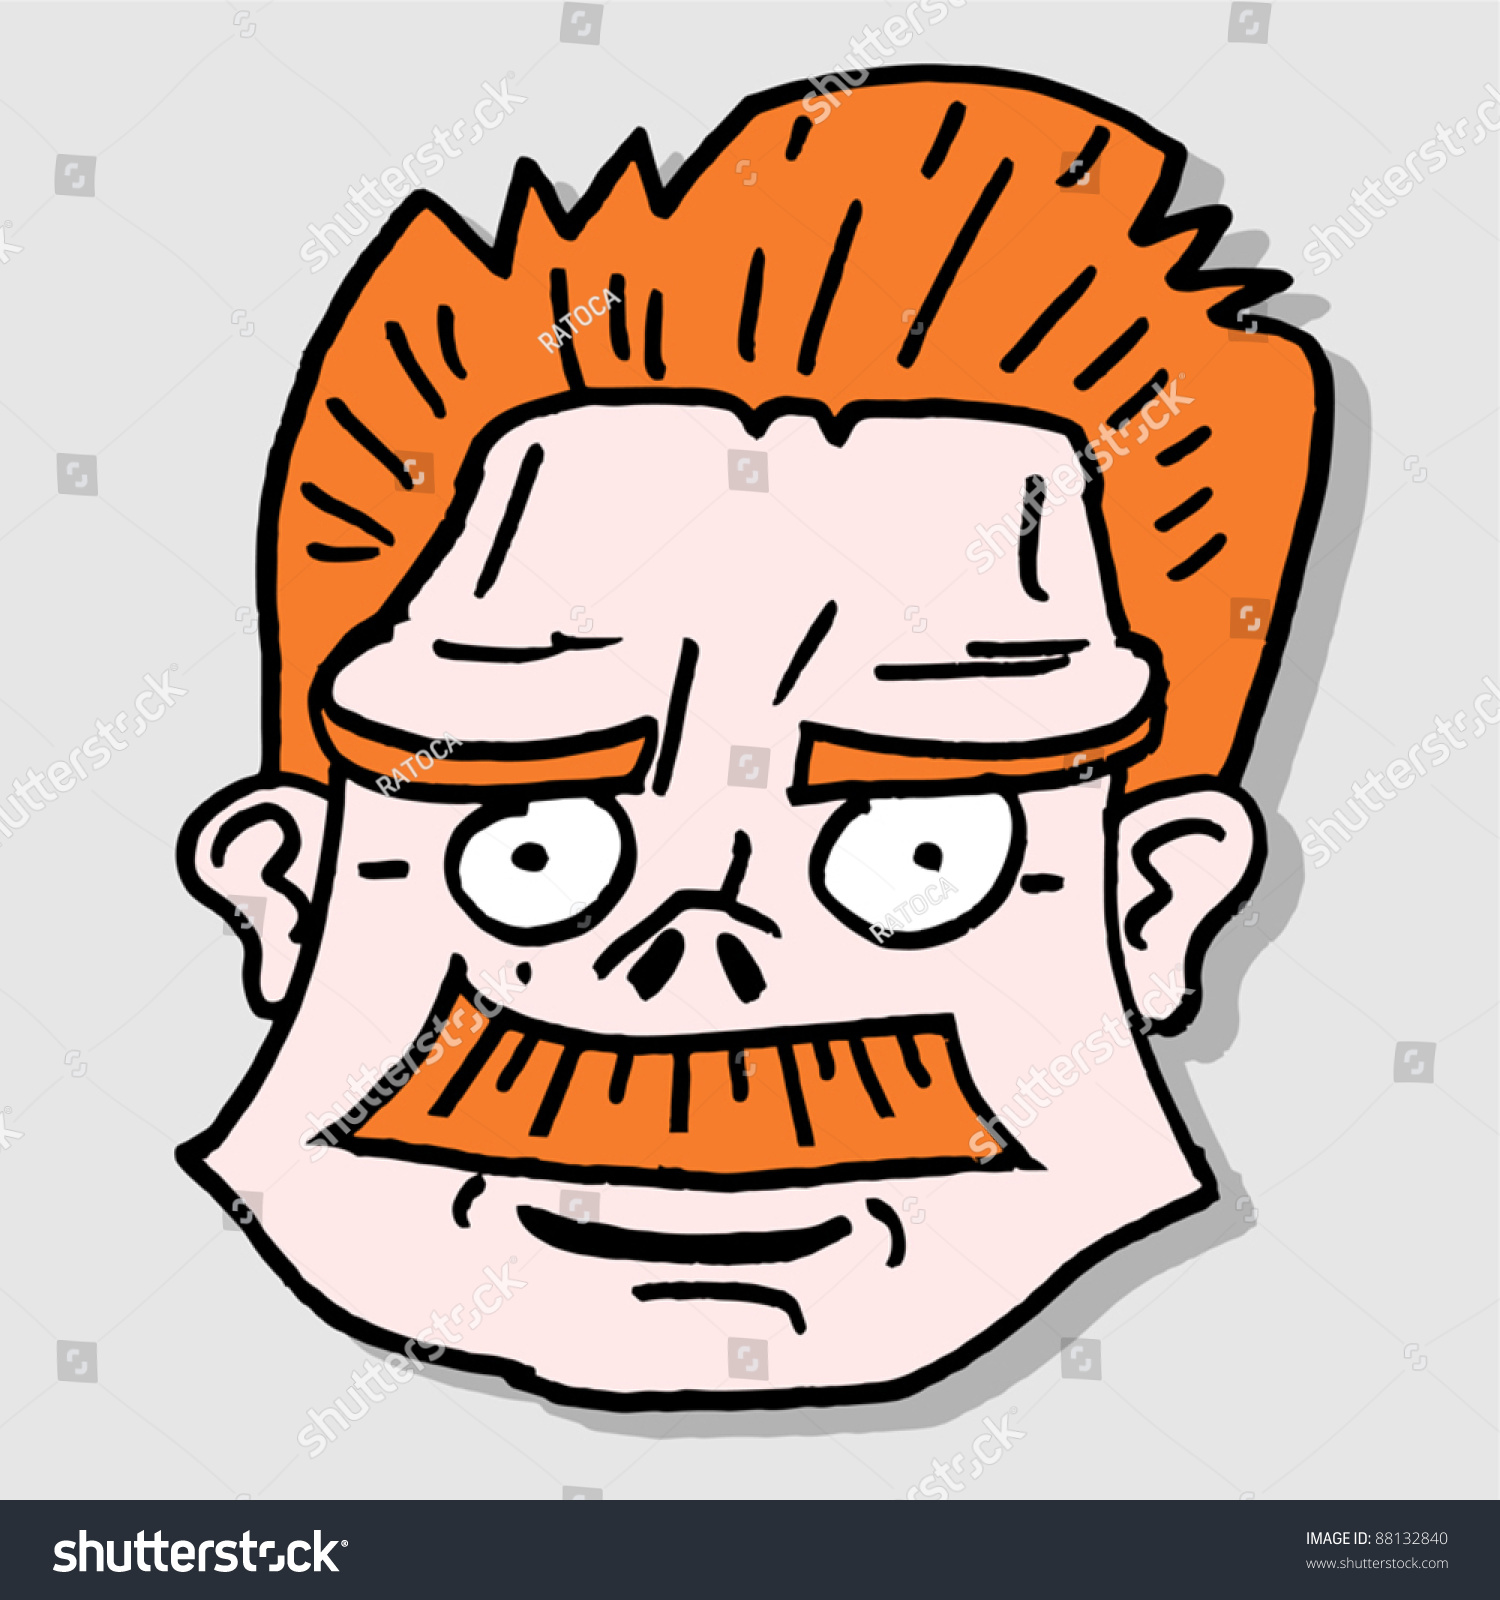 Drawing A Serious Human Face Stock Vector Illustration 88132840